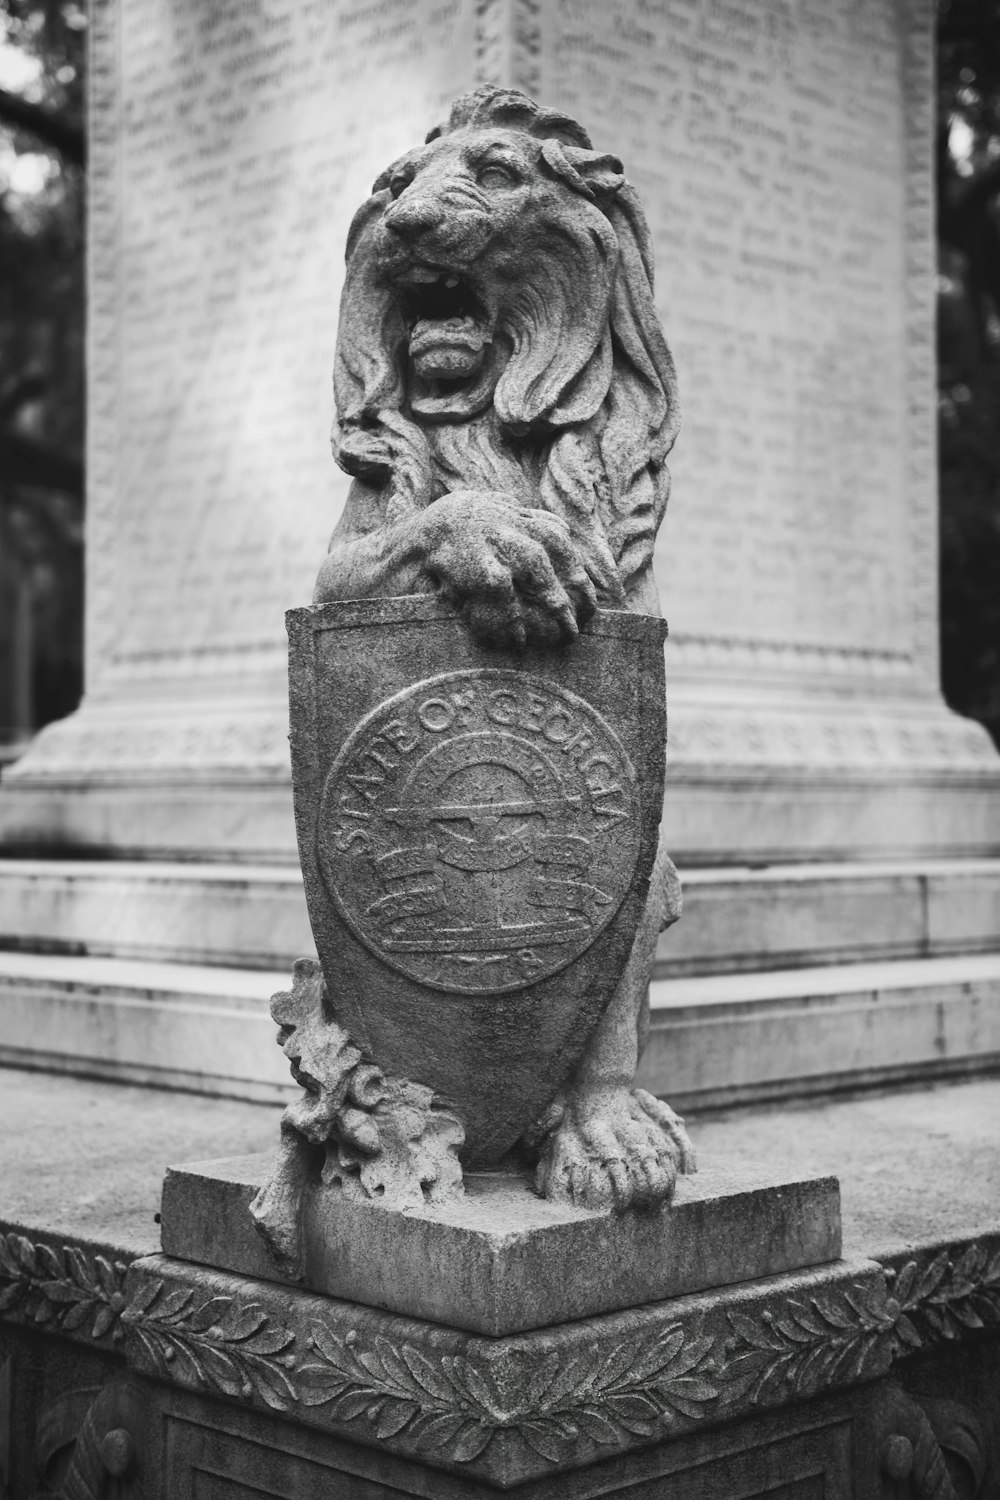 a statue of a lion holding a shield